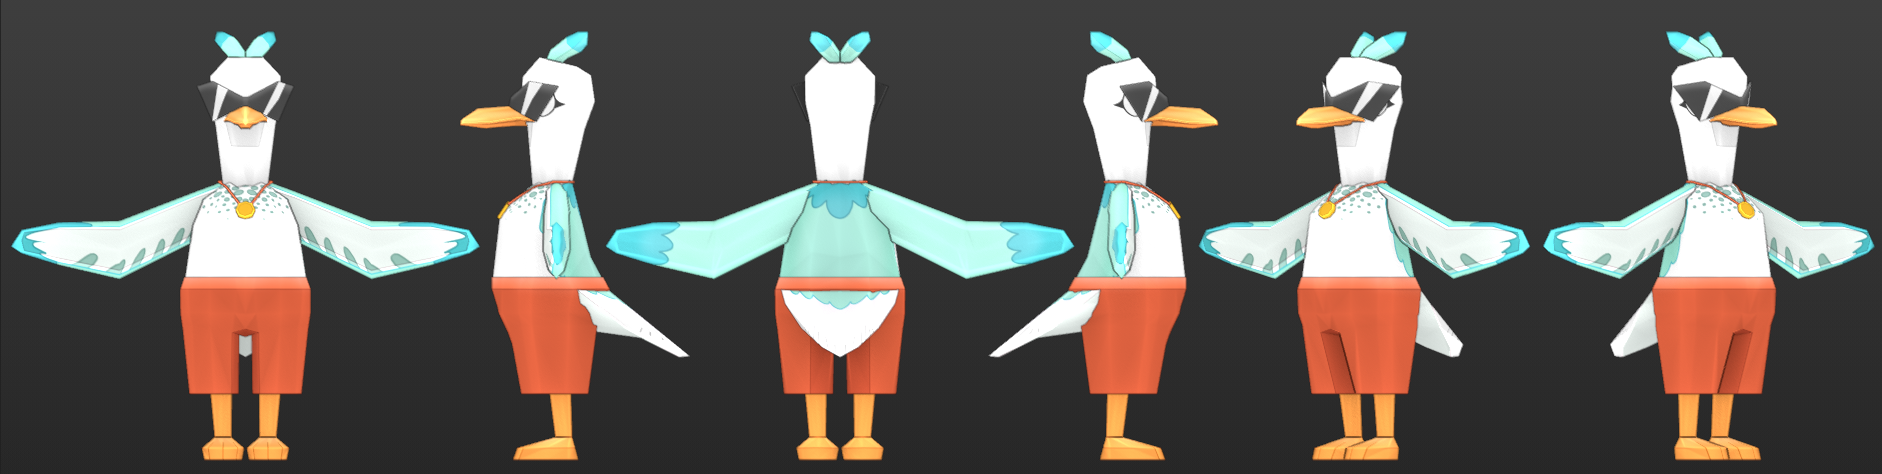 SeaSeagull Reference Sheet 3D